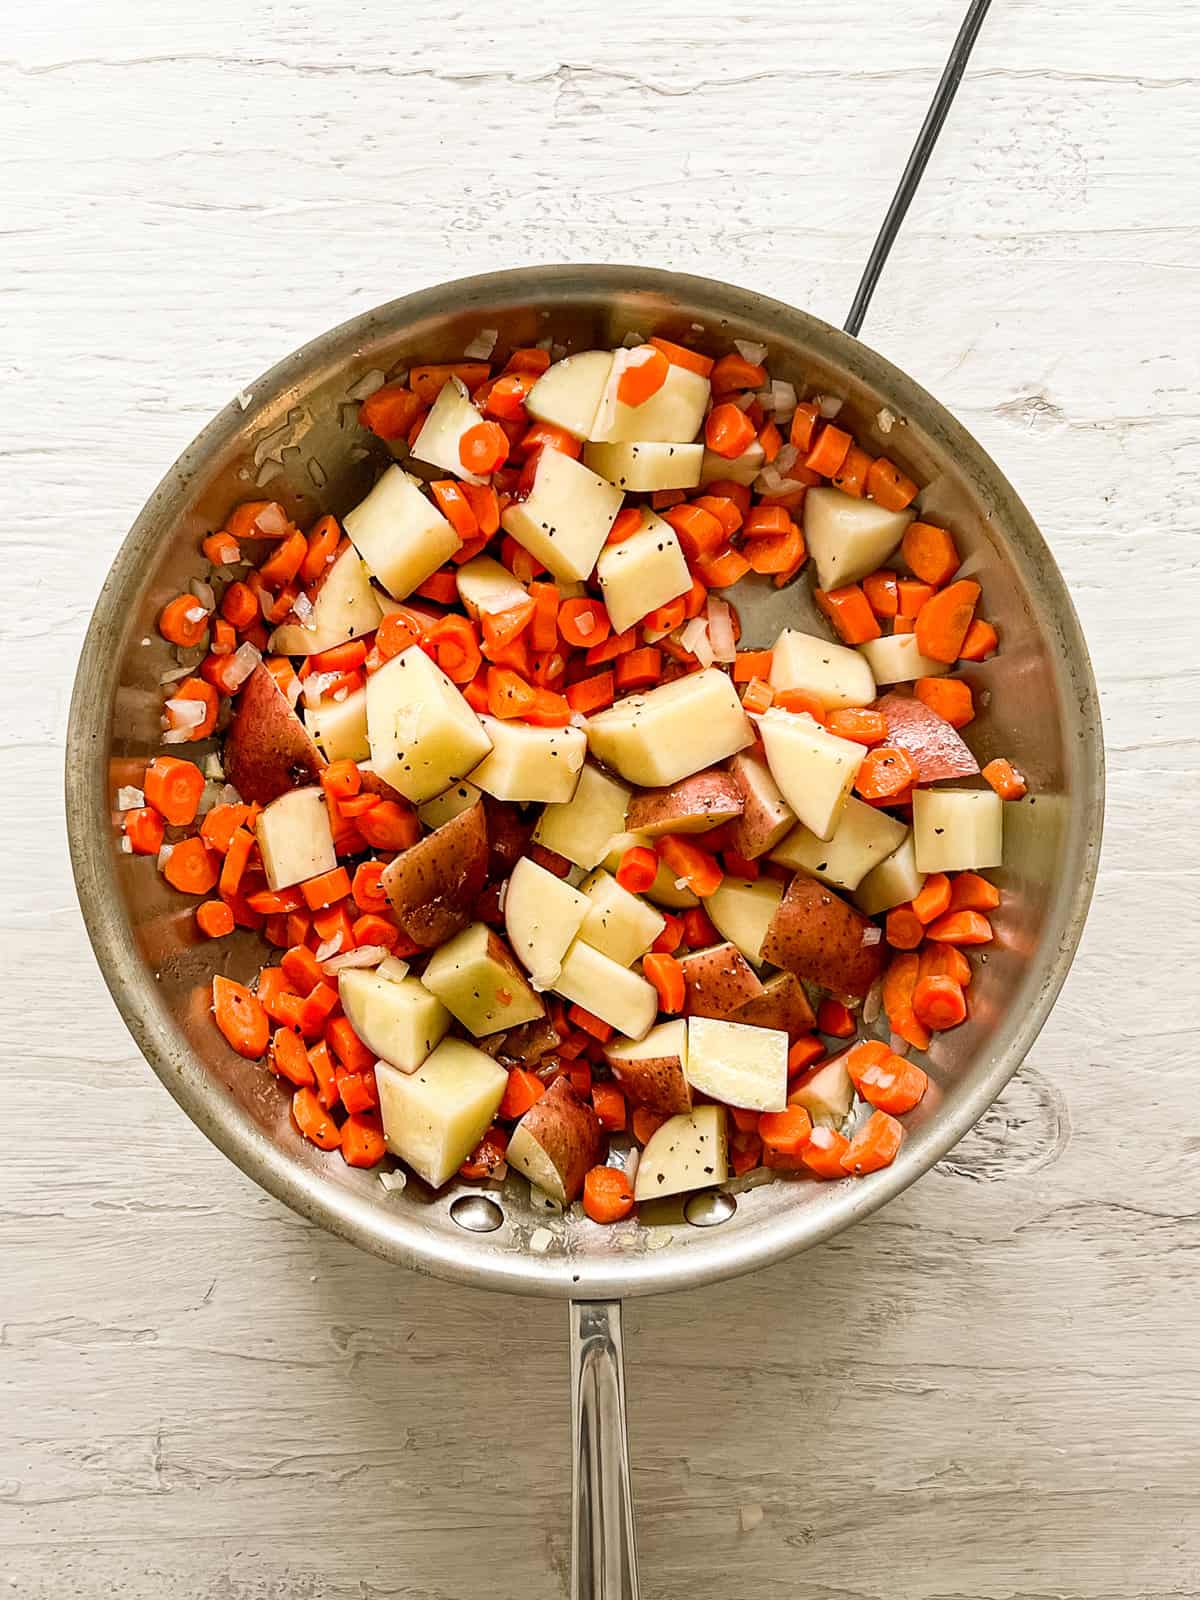 Sautéed carrots, onions, and red potatoes in a frying pan.